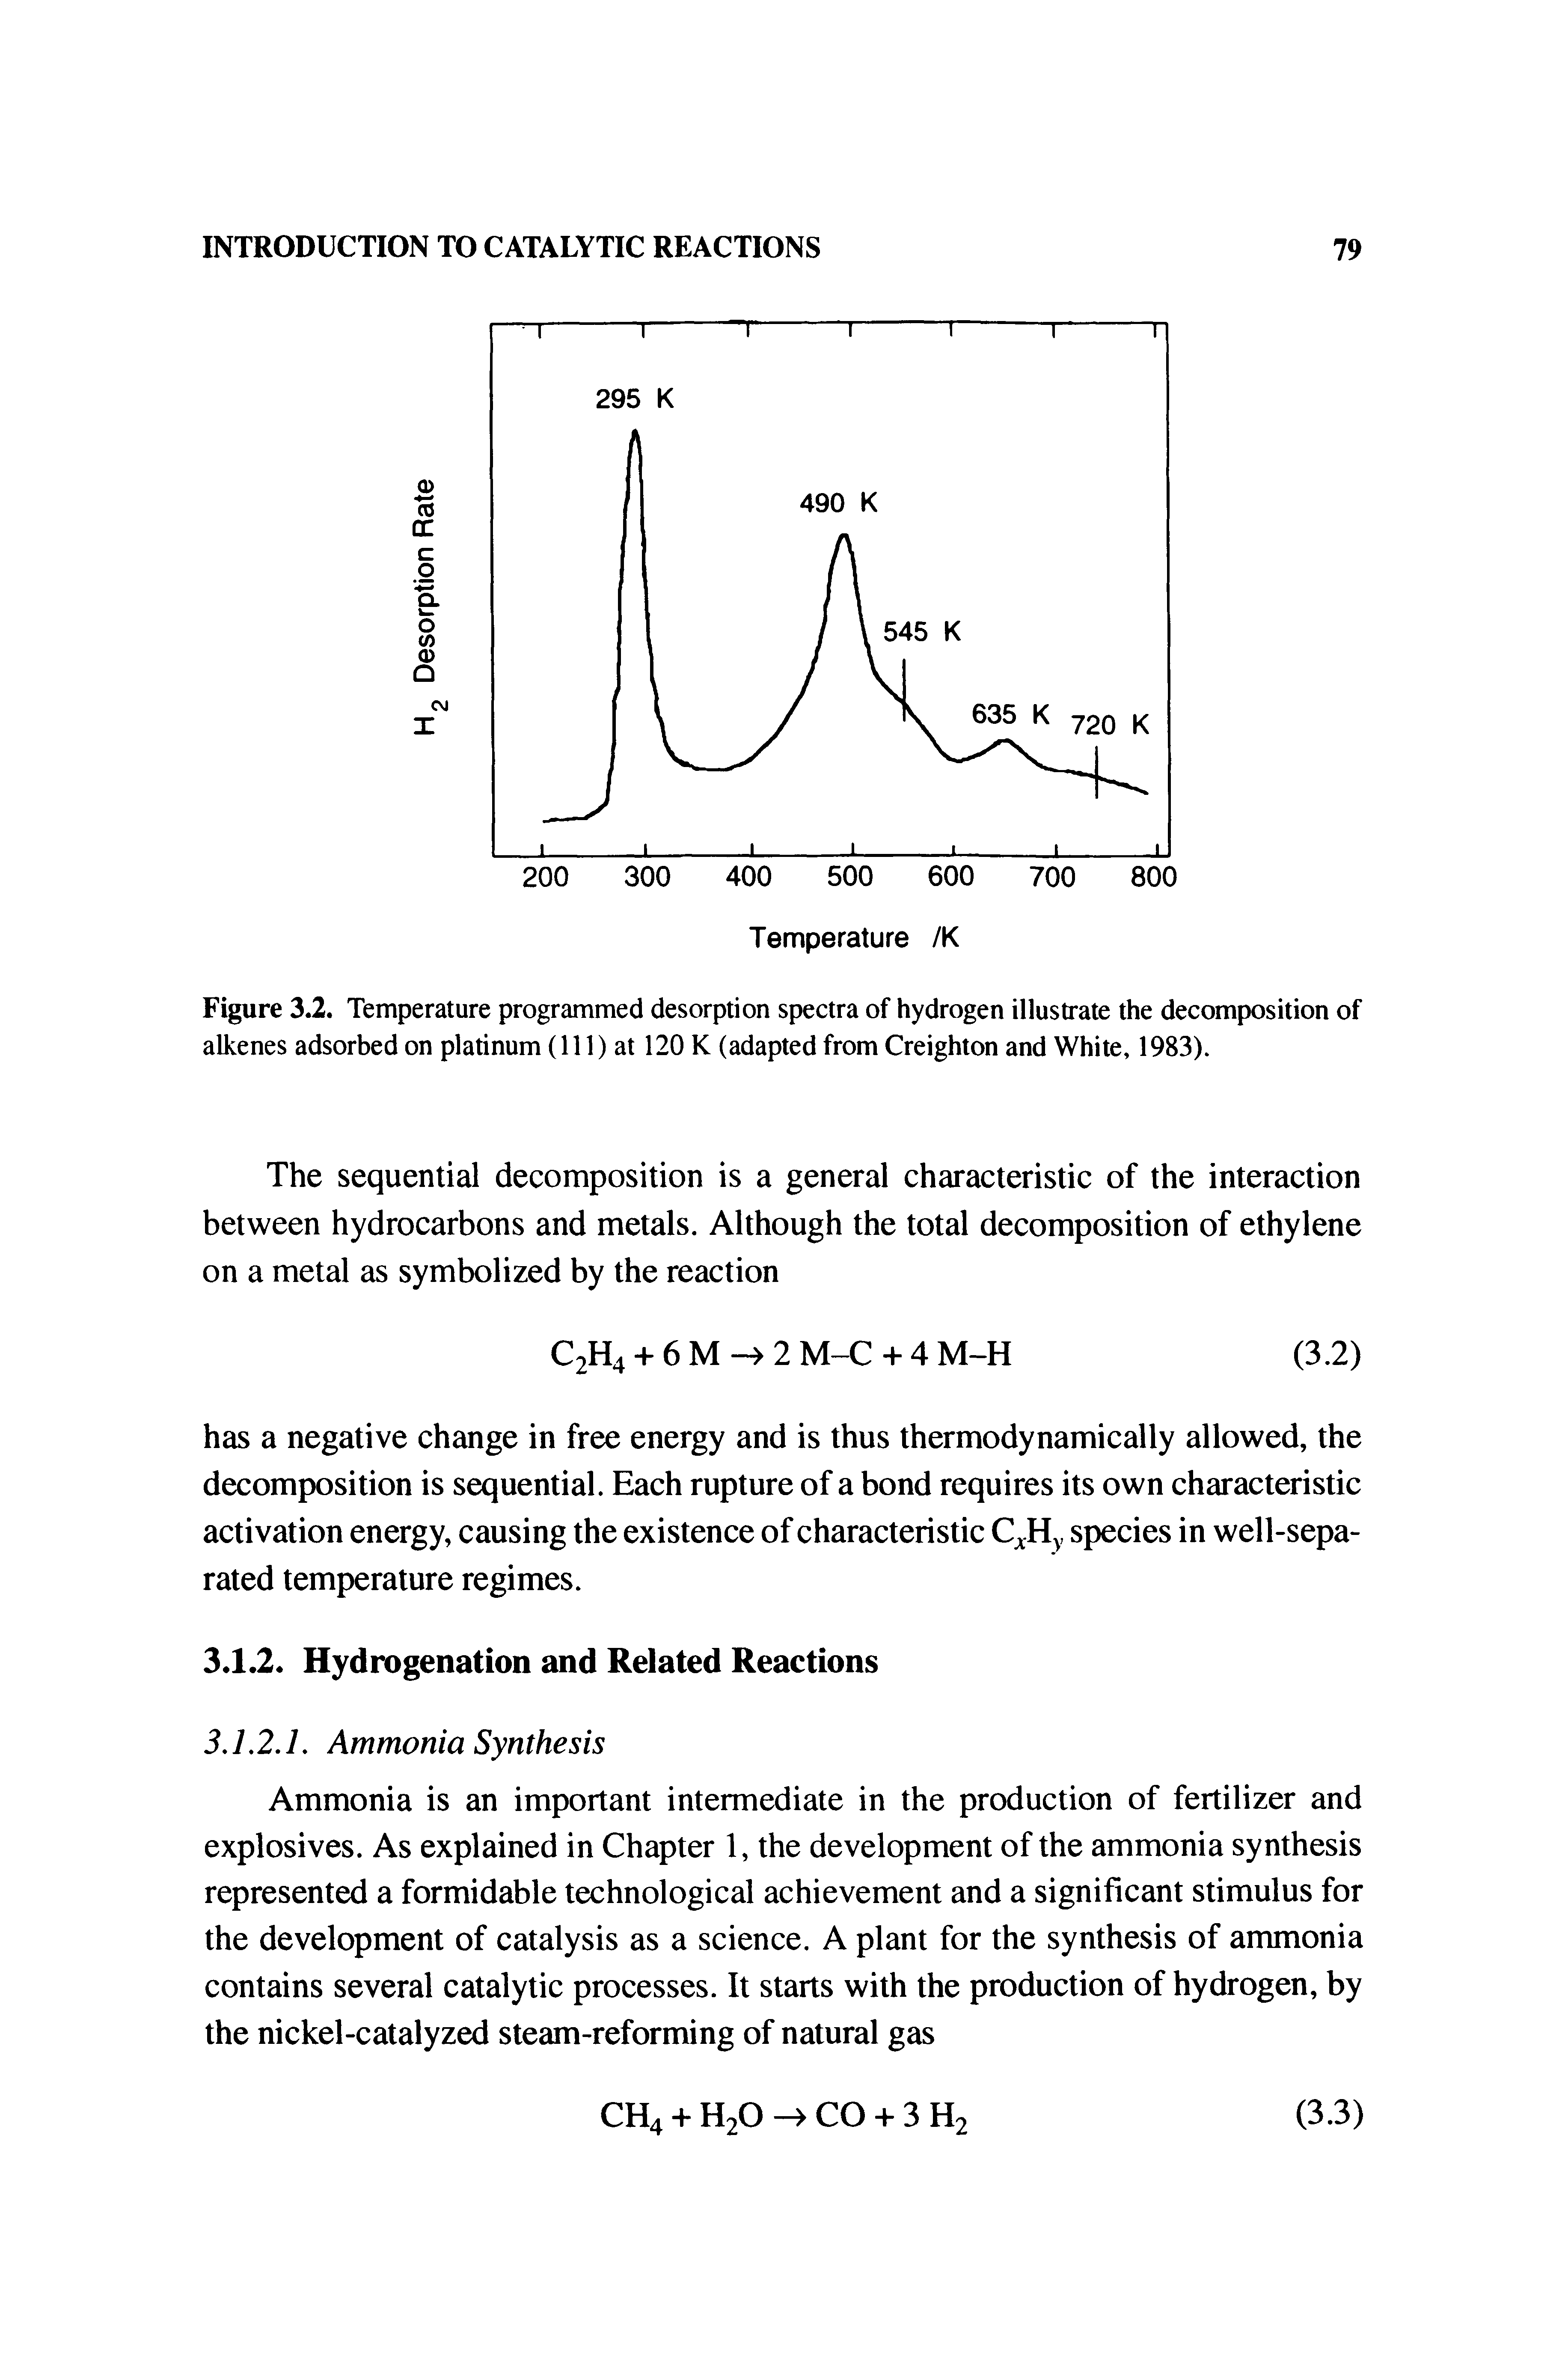 Figure 3.2. Temperature programmed desorption spectra of hydrogen illustrate the decomposition of alkenes adsorbed on platinum (111) at 120 K (adapted from Creighton and White. 1983).